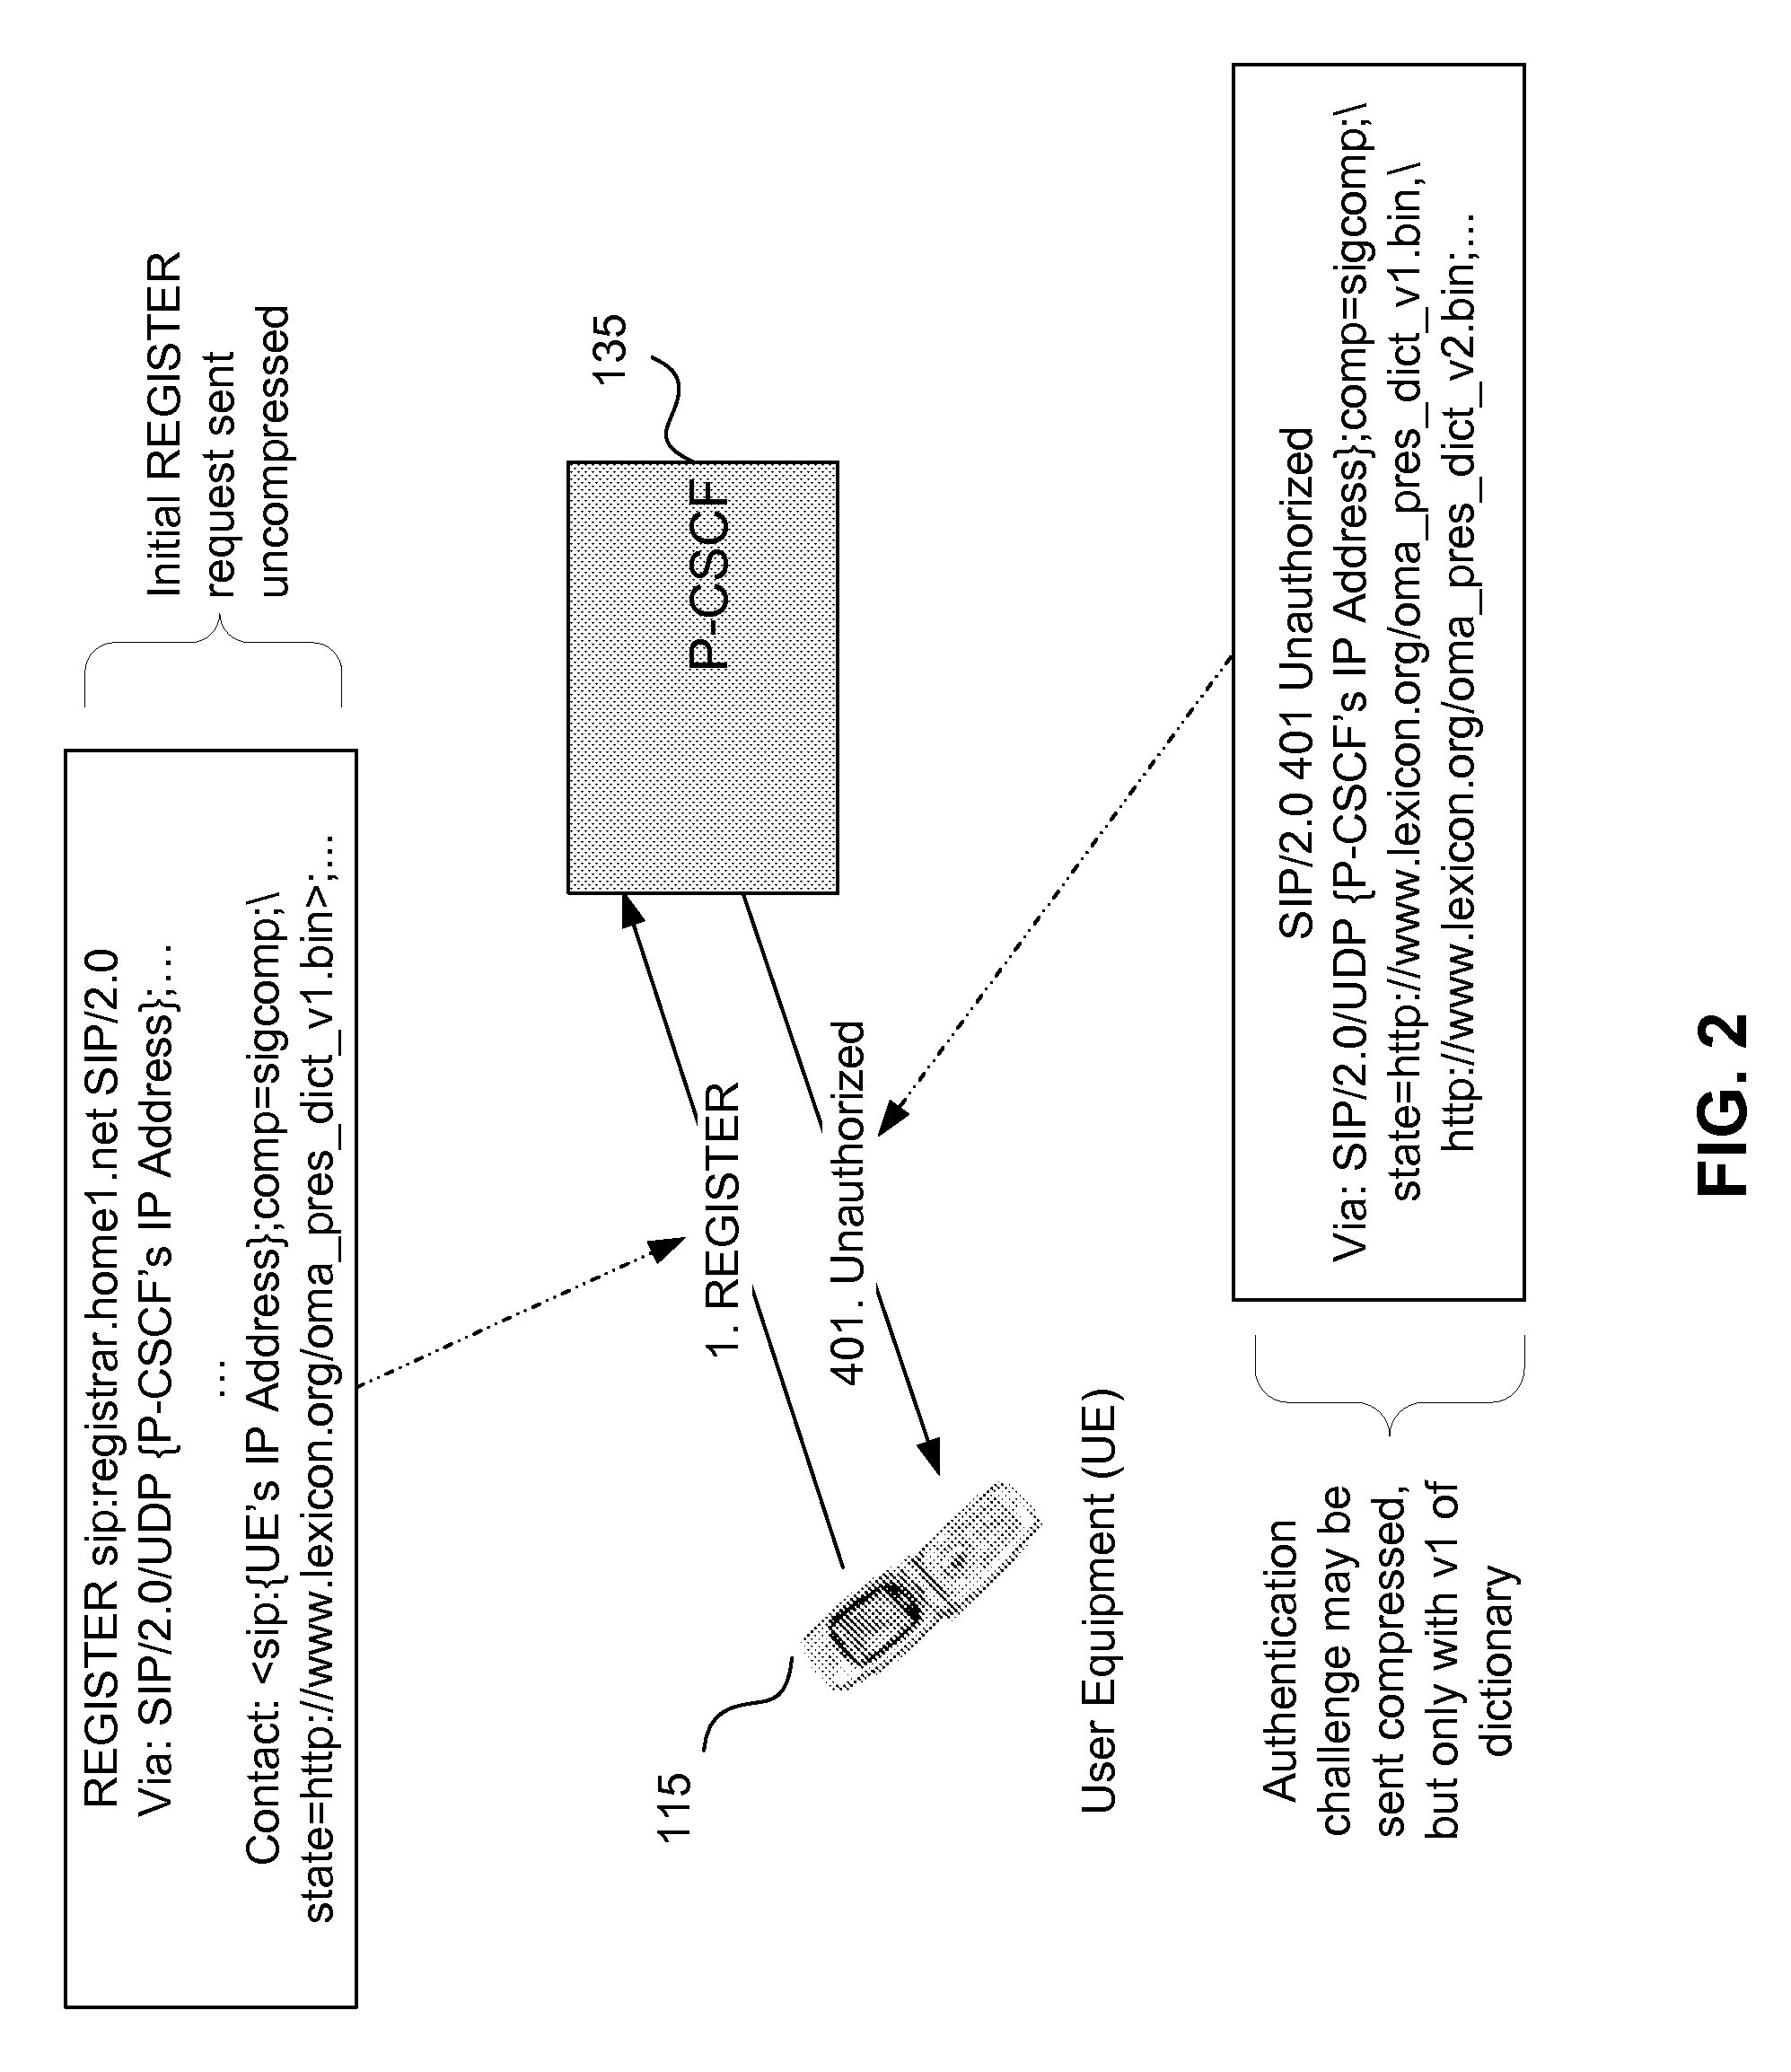 Optimizing static dictionary usage for signal compression and for hypertext transfer protocol compression in a wireless network